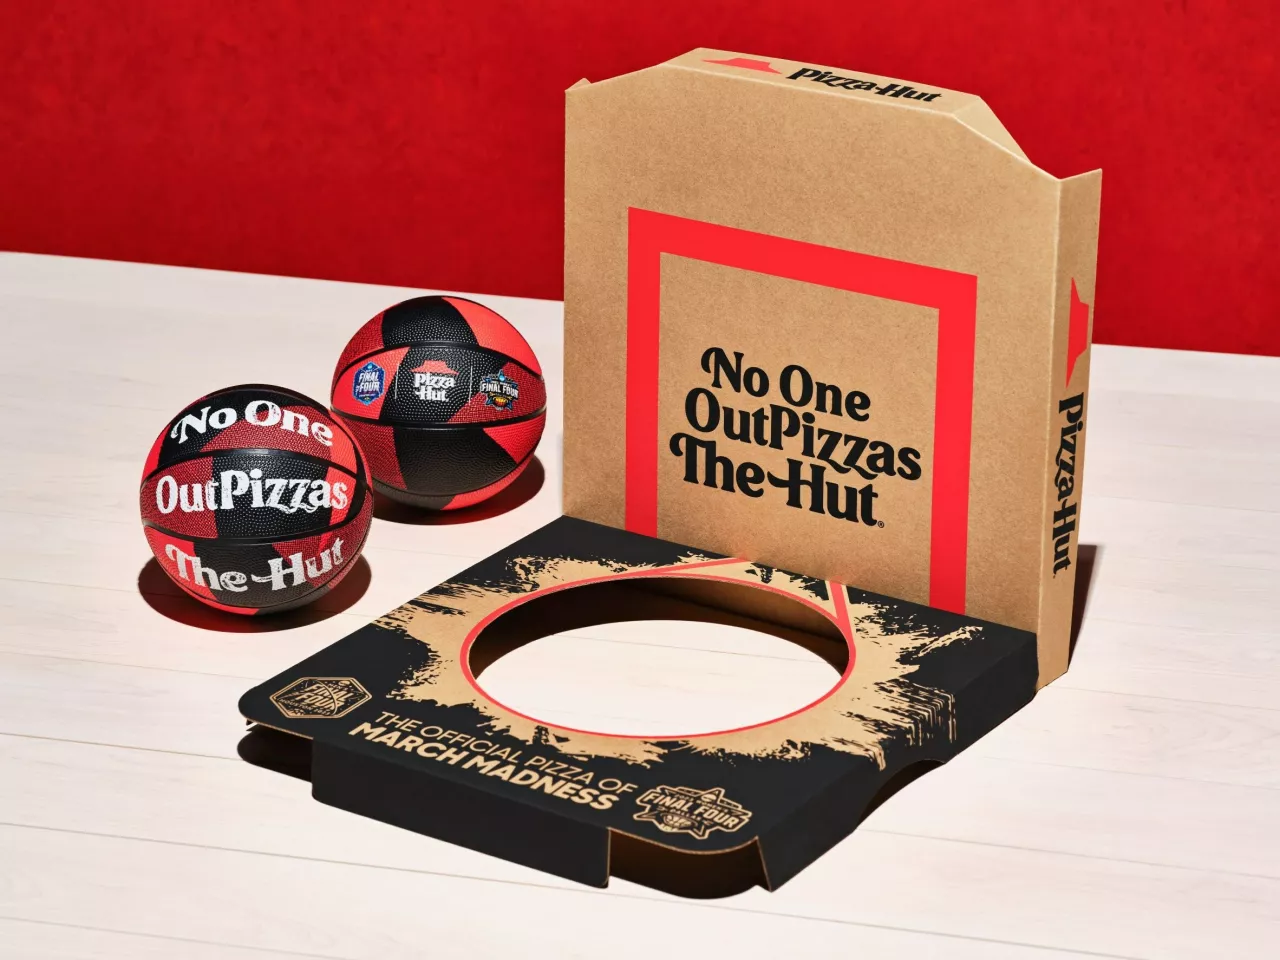 Pizza Hut Brings Back Limited-Edition Mini Basketballs for the First Time Since the 1990s img#3